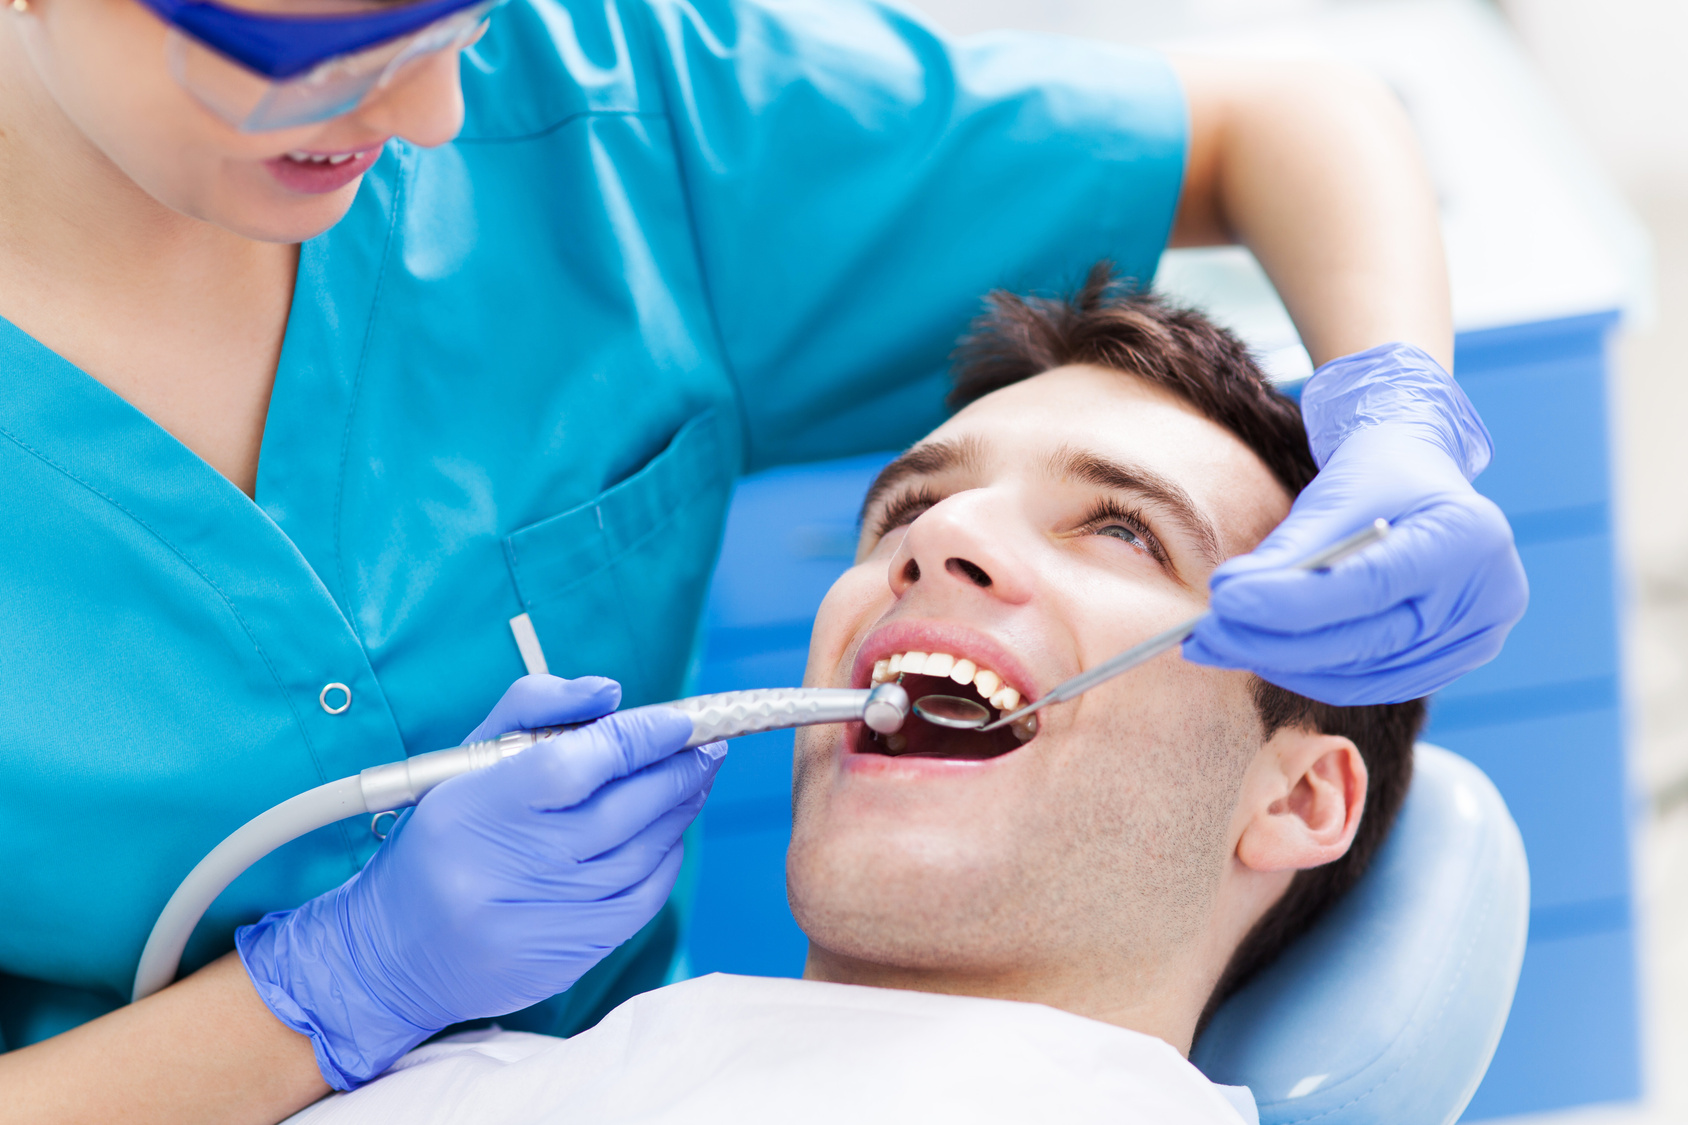 Global Dental Services Market Size, Revenue, Demand, Growth, Applications, Forecast to 2022